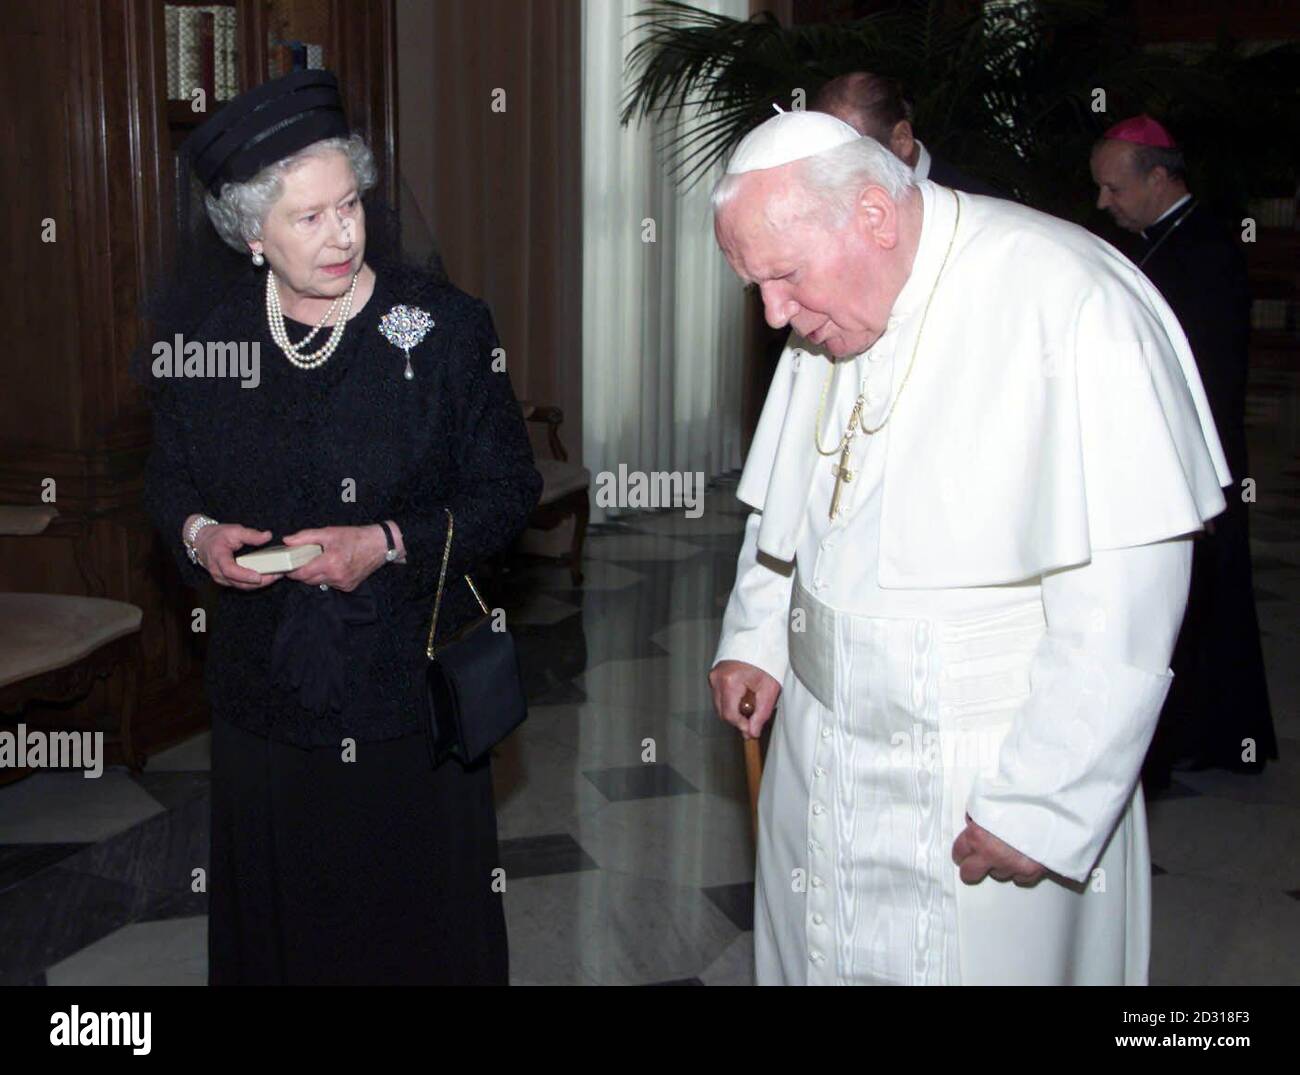 Britain's Queen Elizabeth II talks with Pope John Paul II during an  audience at the Vatican in Rome, Italy. Dressed in black and wearing a  veil, the Queen was greeted by the